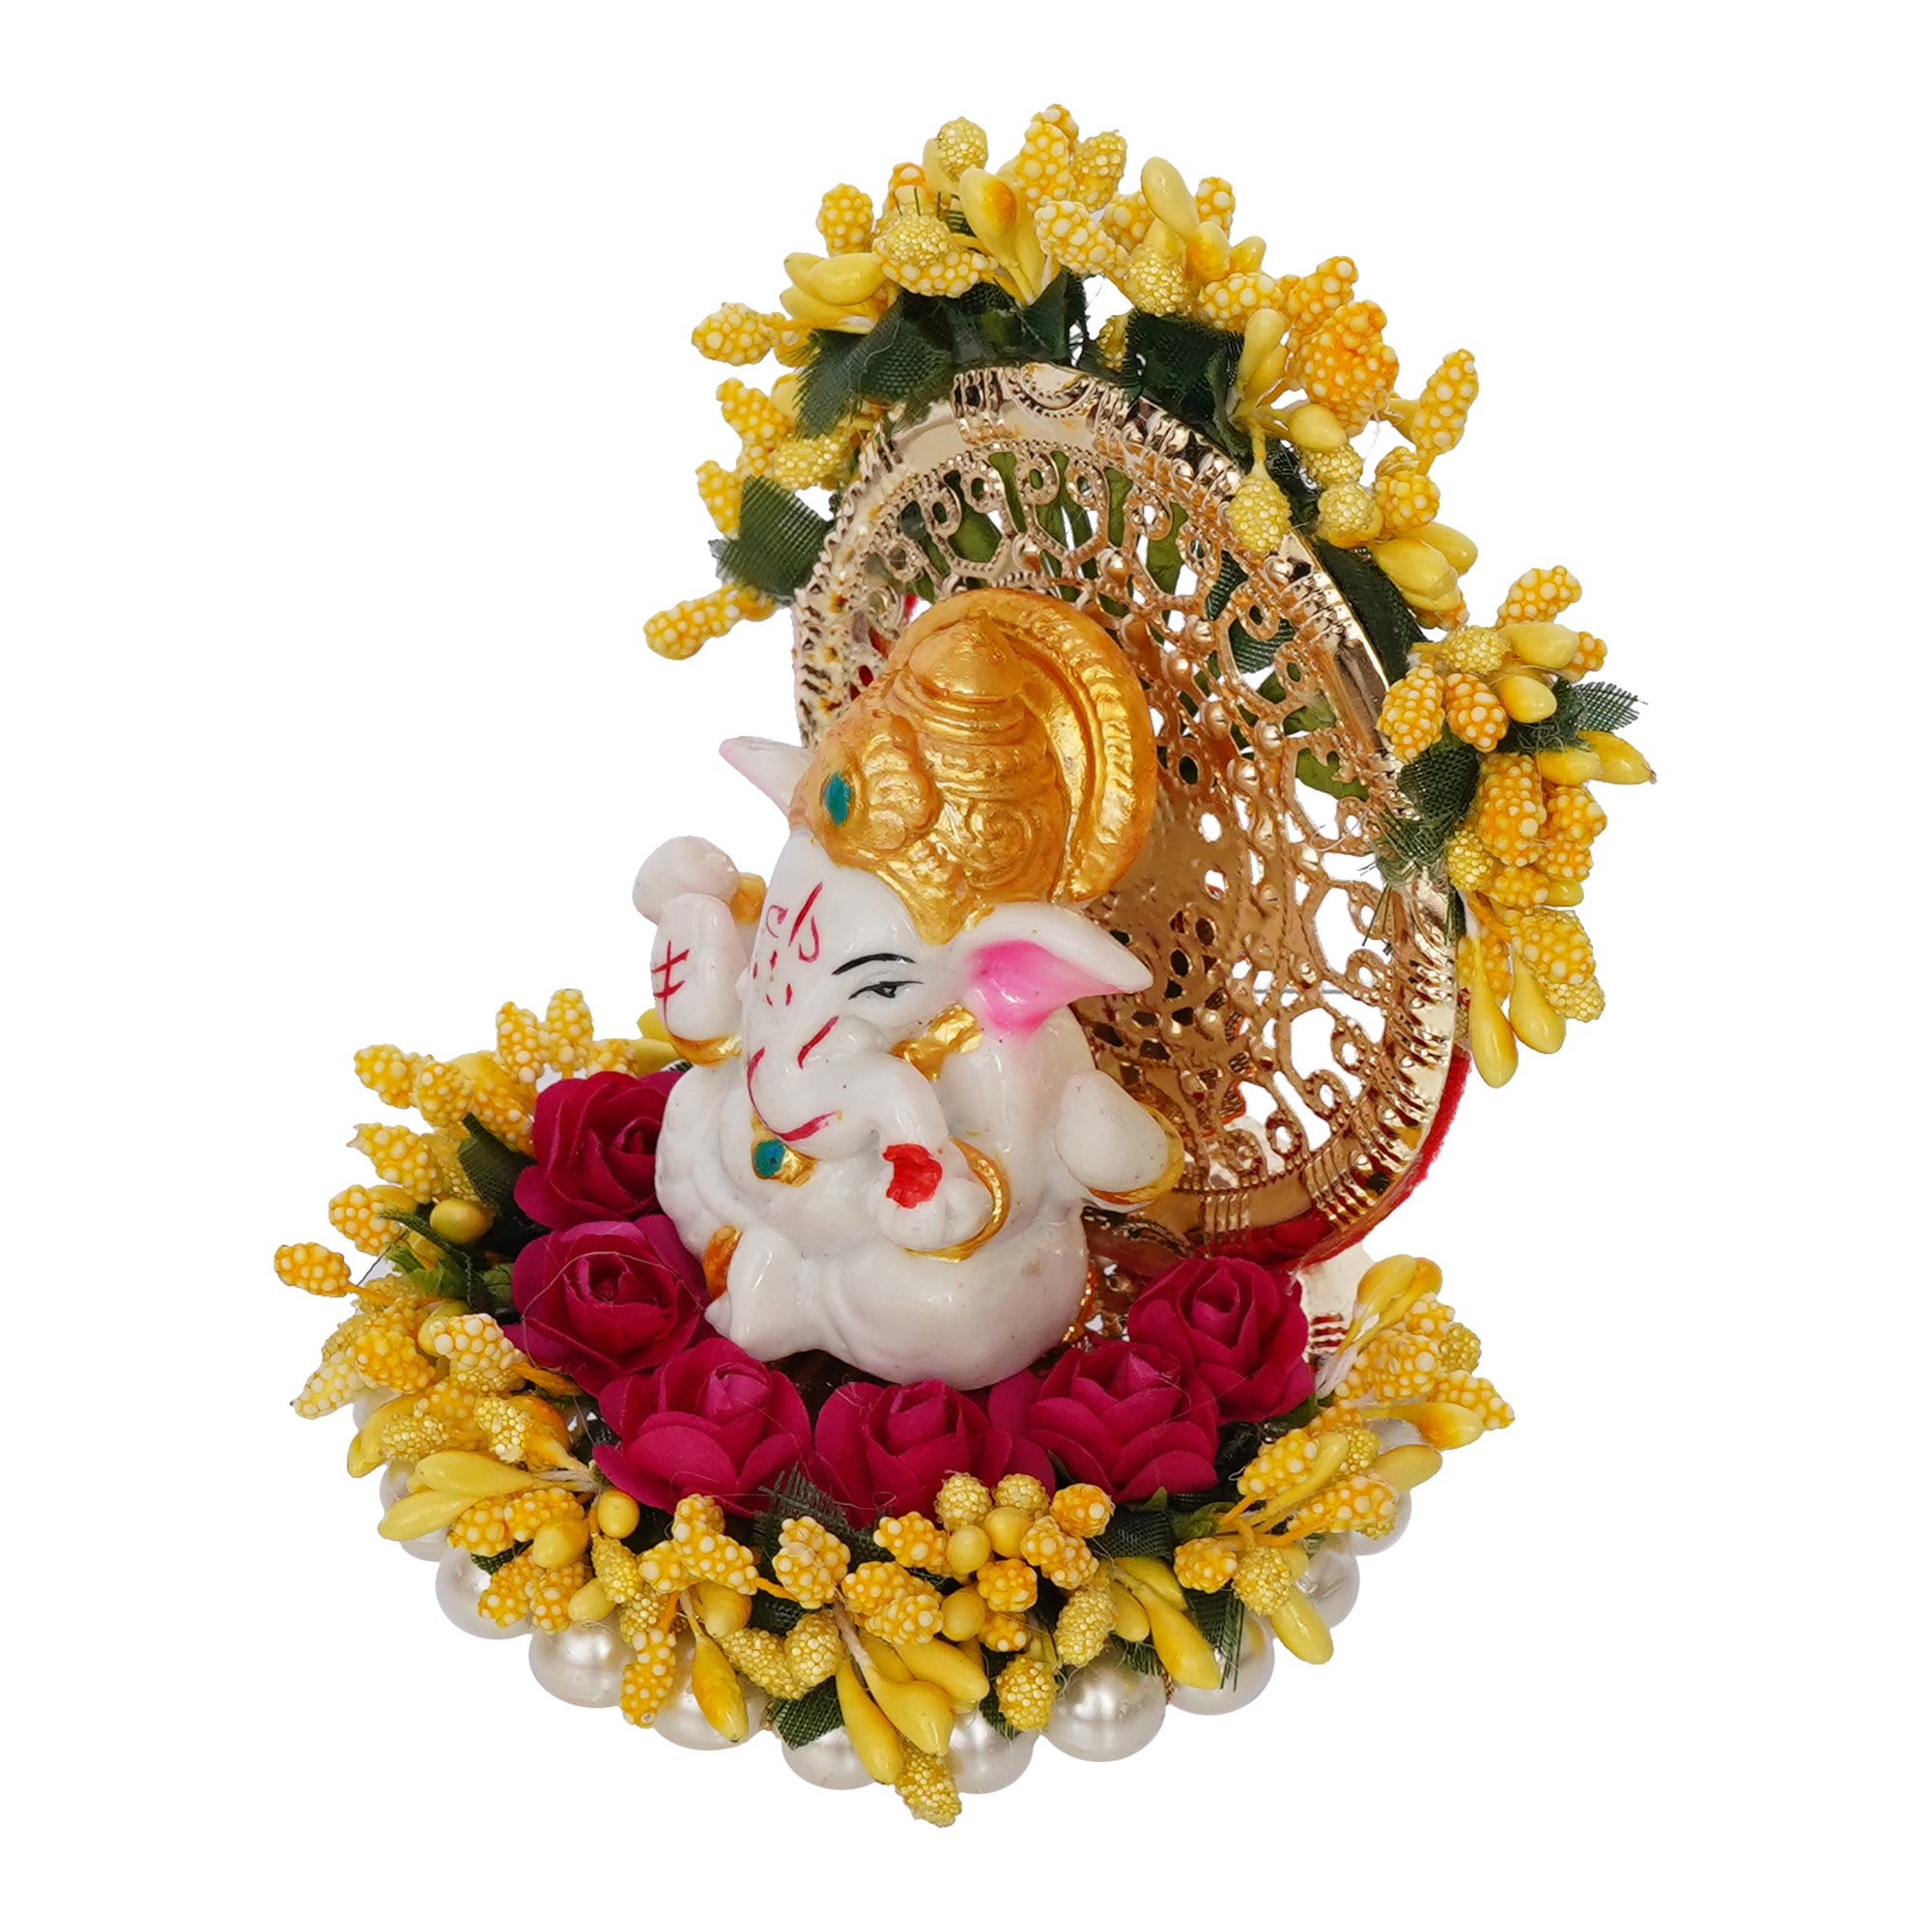 Polyresin Lord Ganesha Idol on Handcrafted Yellow Floral Plate for Home and Car Dashboard 5